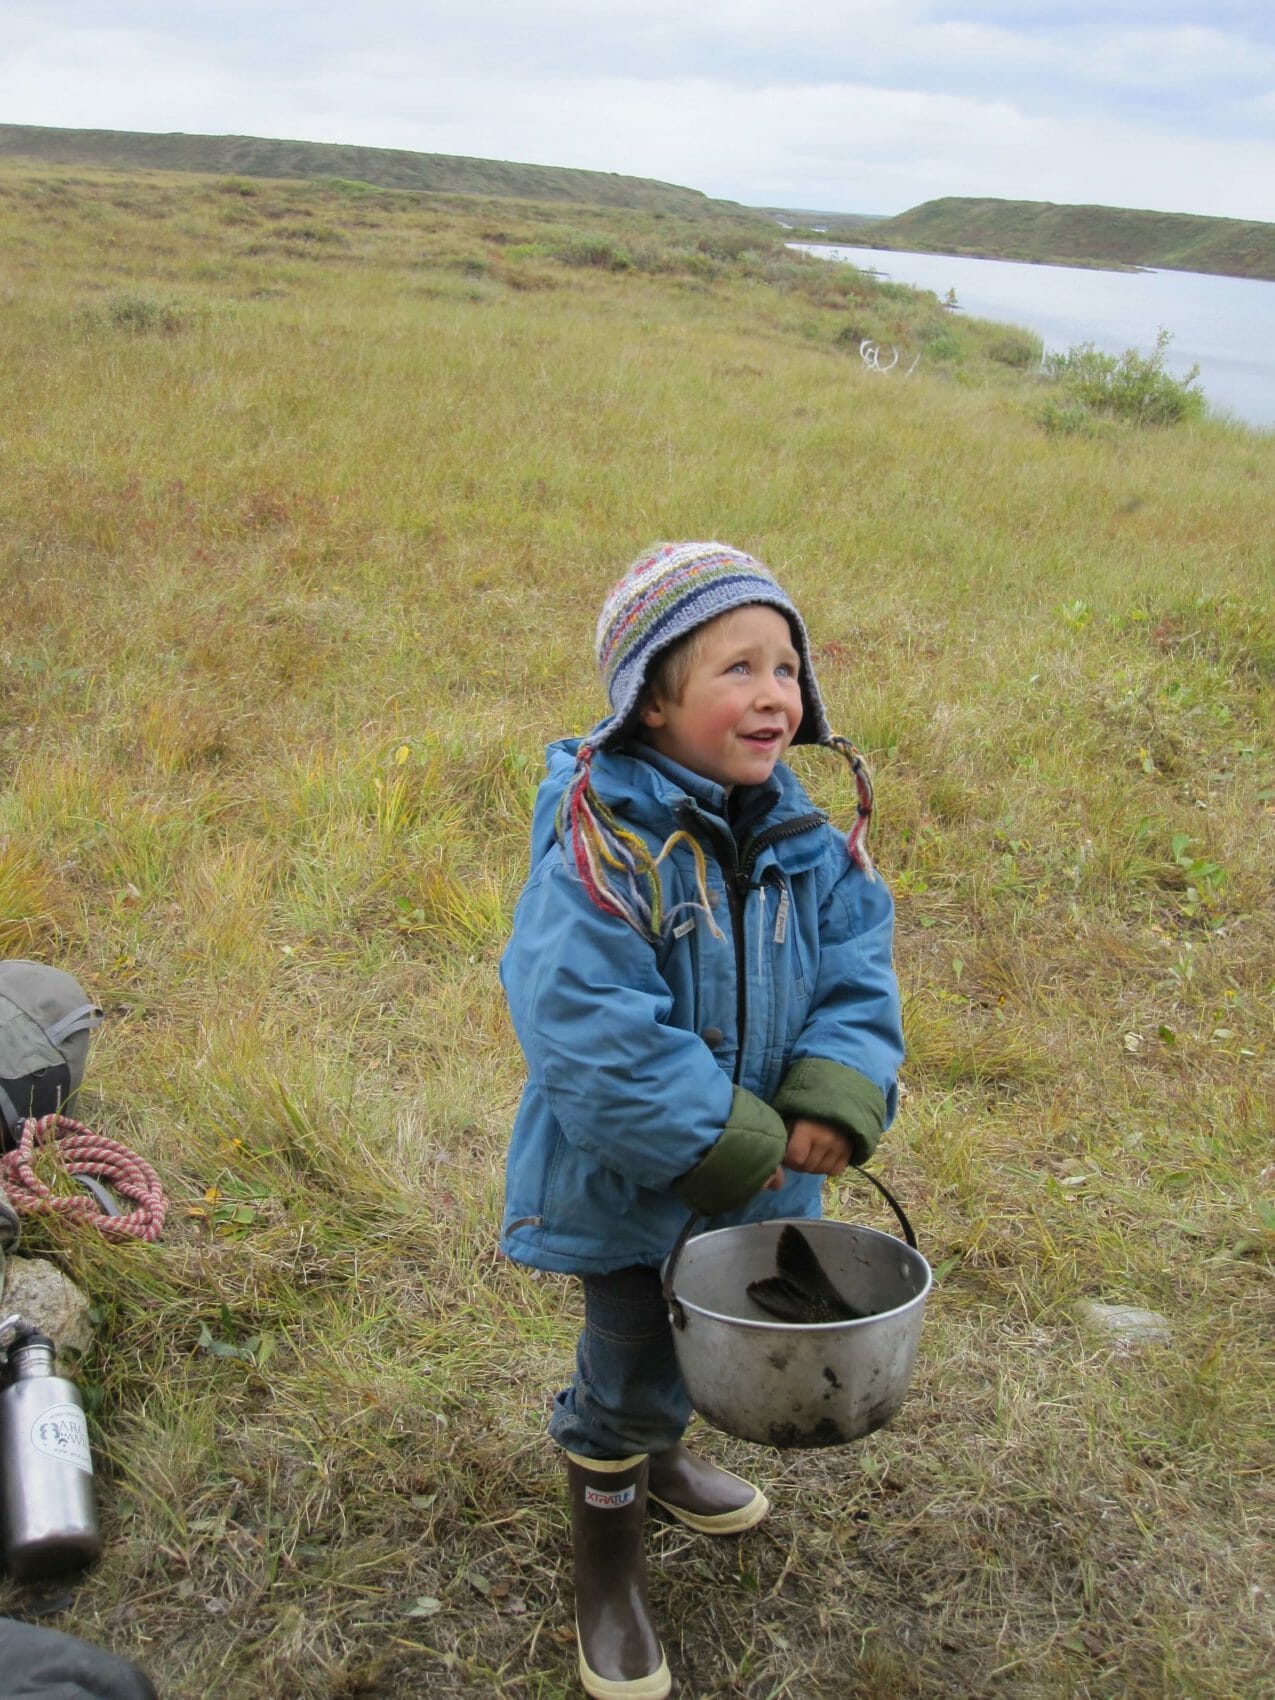 Child camps on the Noatak River in Alaska